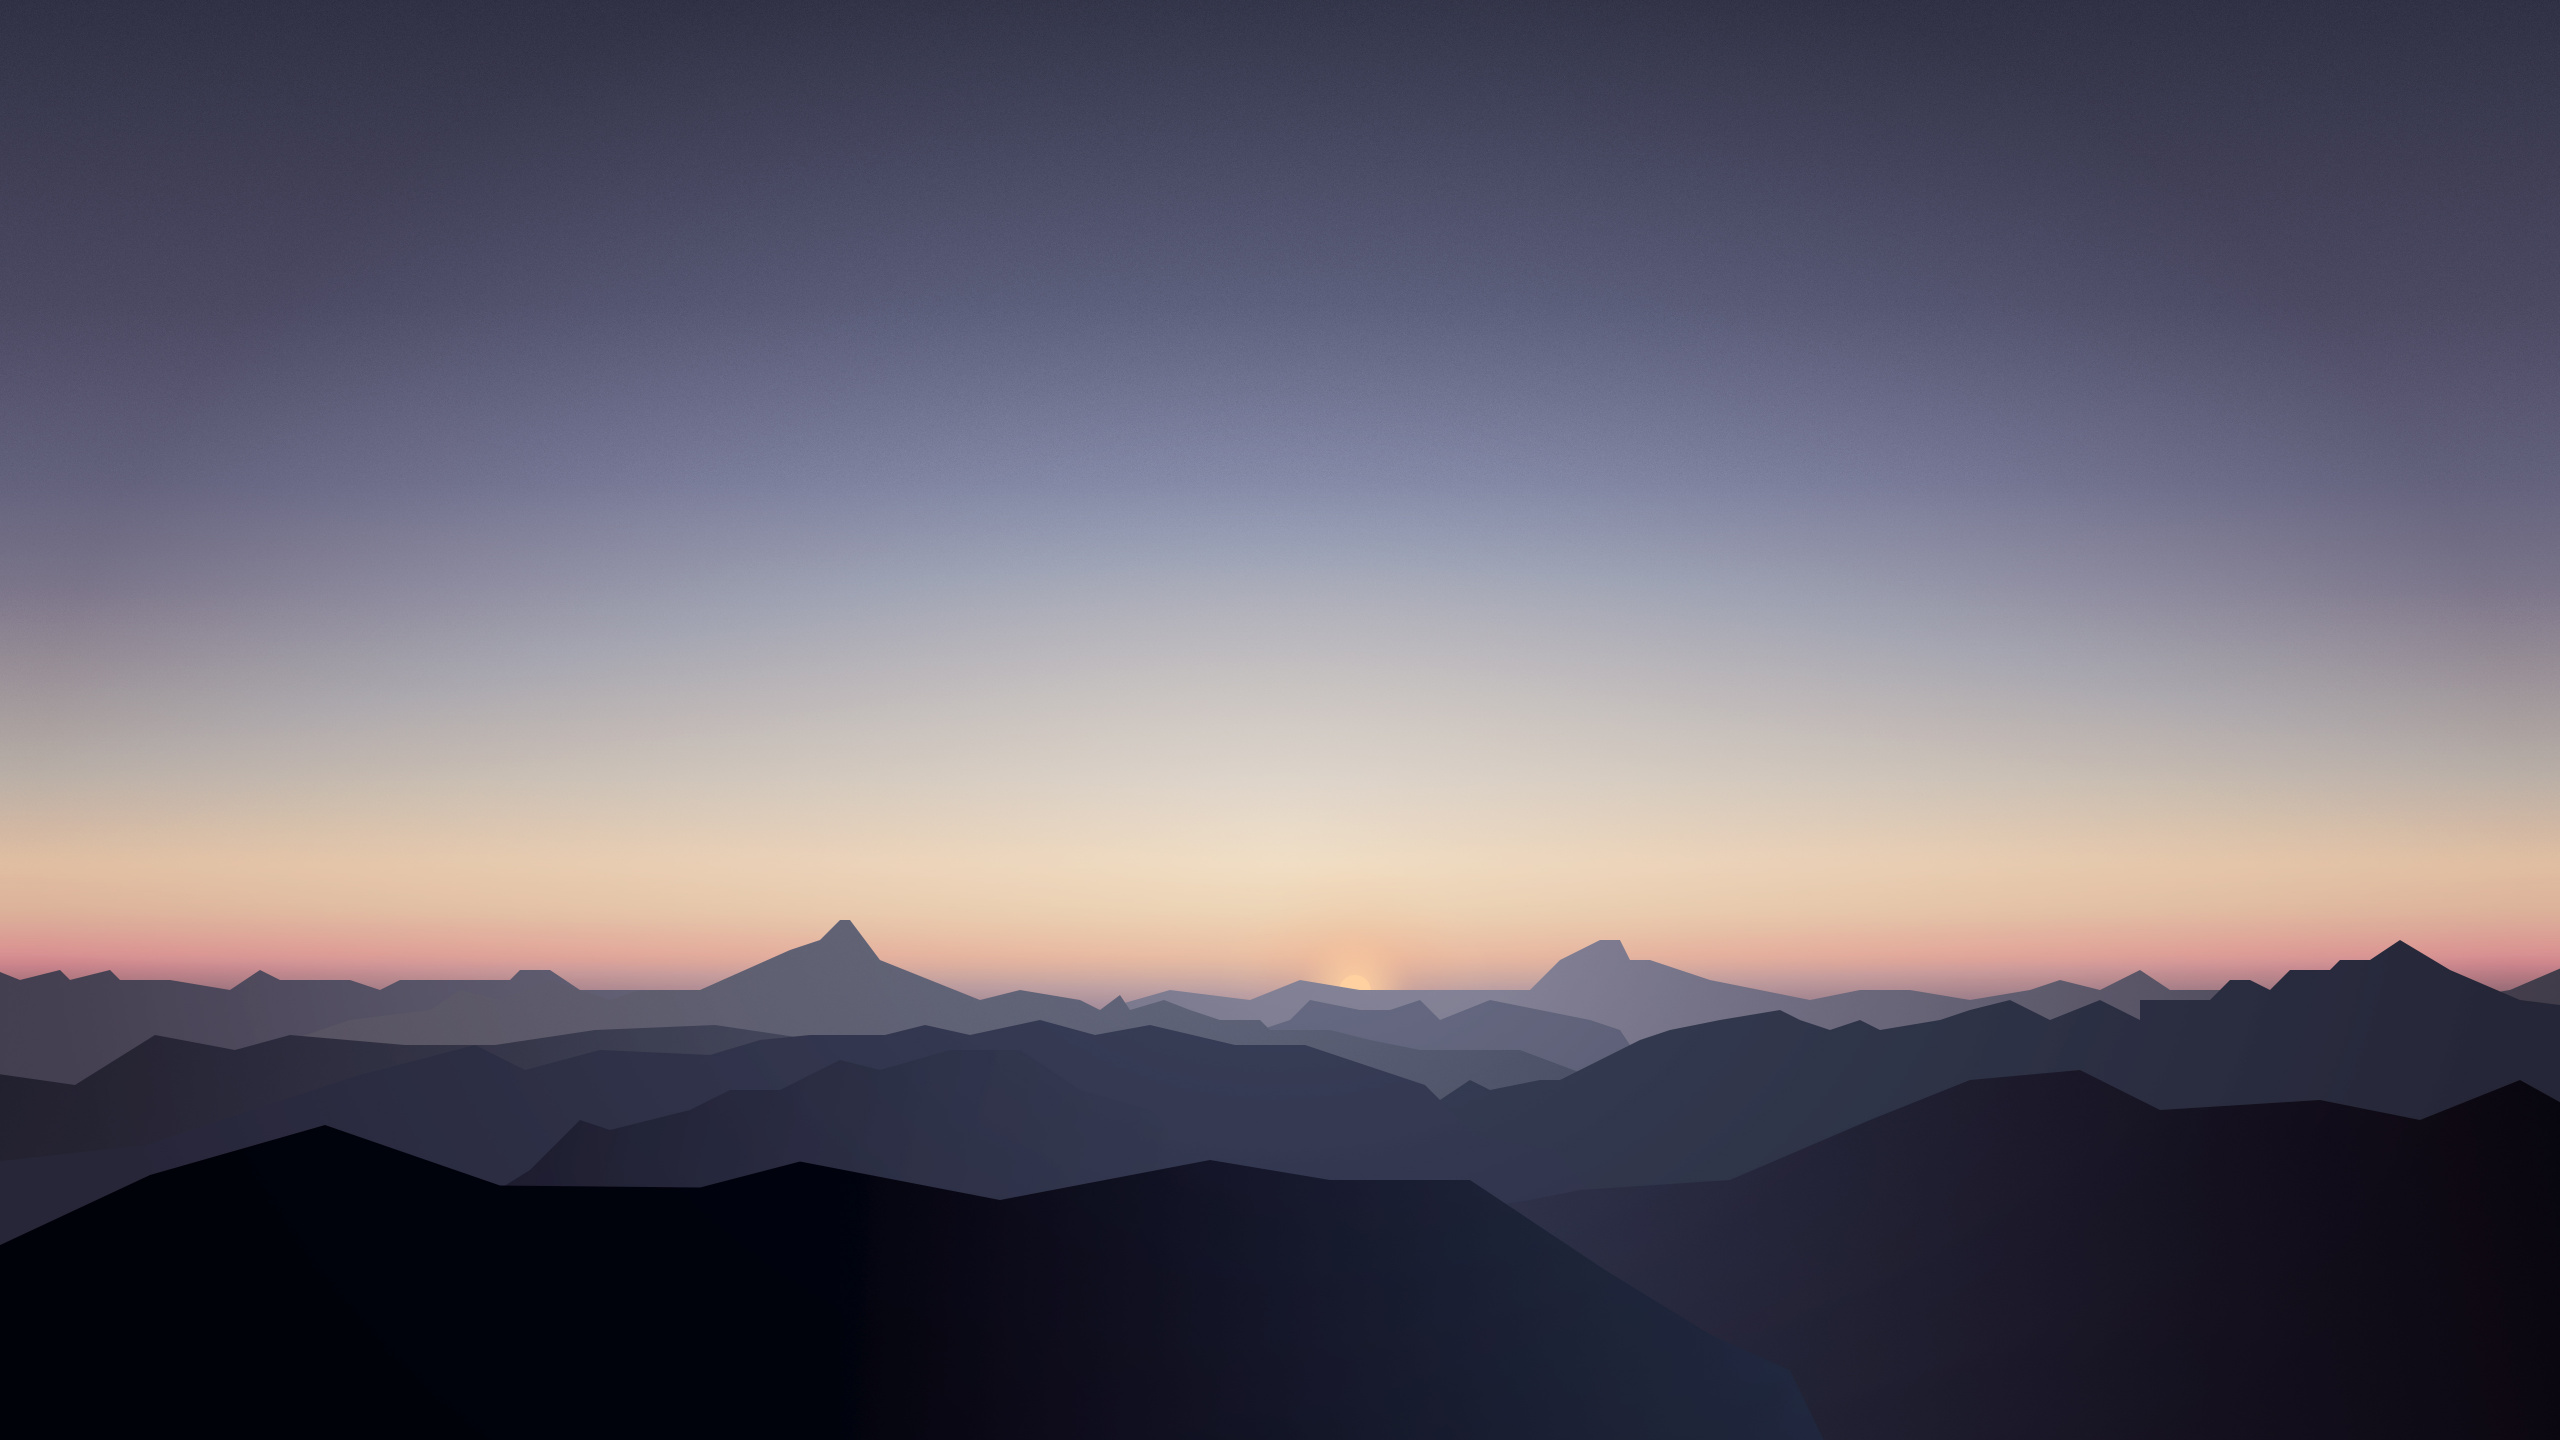 Silhouette of Mountains During Sunset. Wallpaper in 2560x1440 Resolution